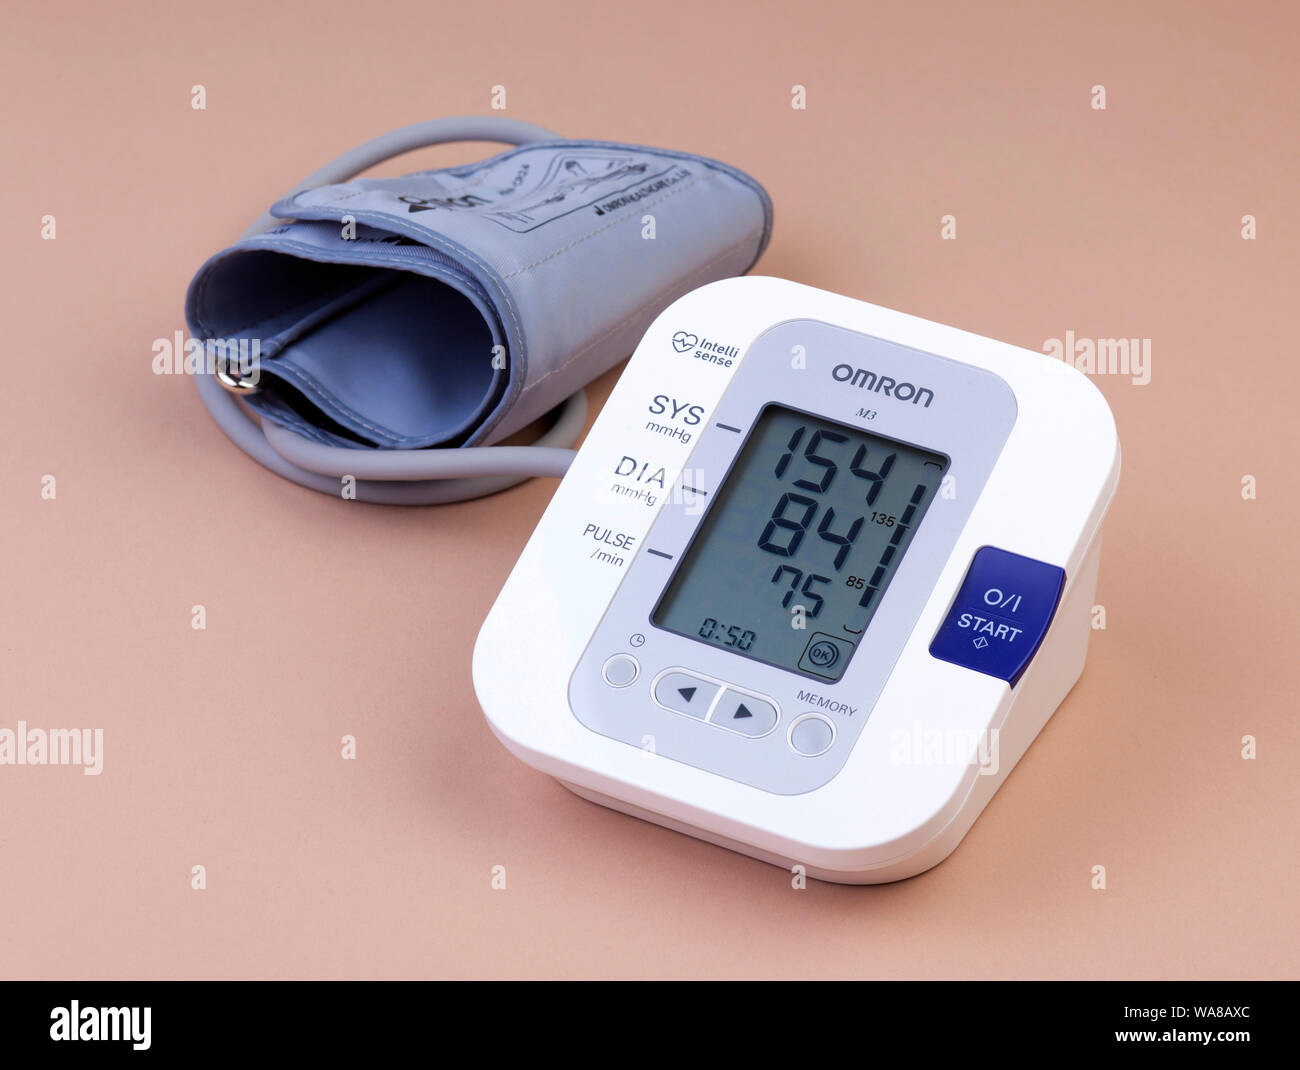 Omron M3 blood pressure and heart rate monitor Stock Photo